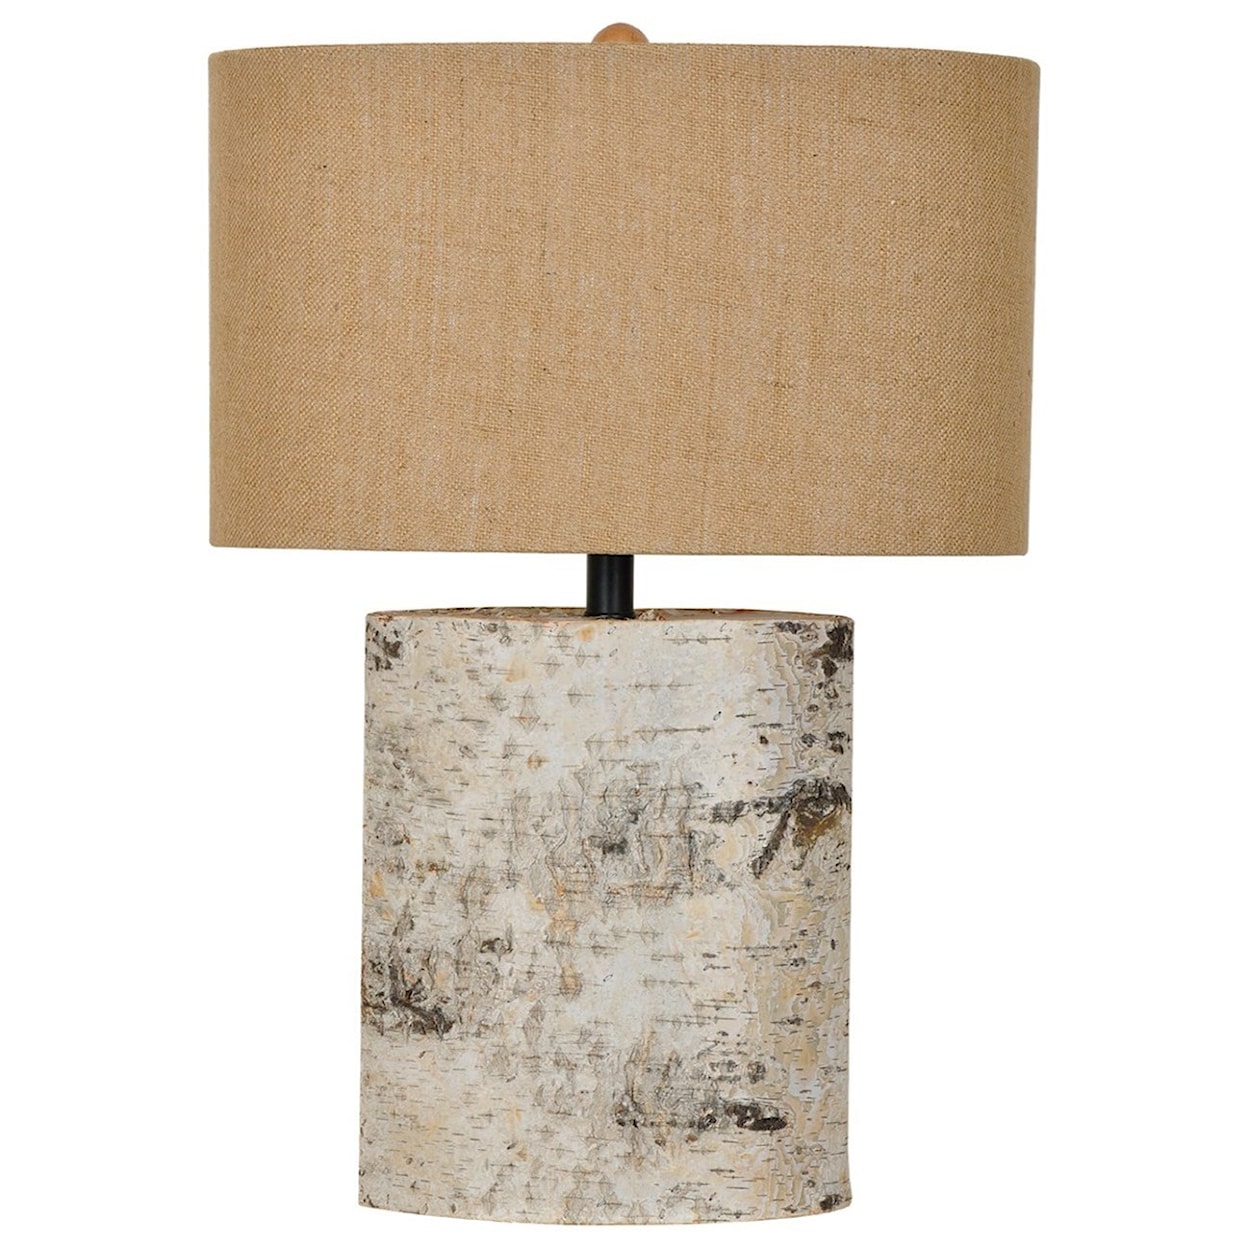 Crestview Collection Lighting Birch Wood Table Lamp